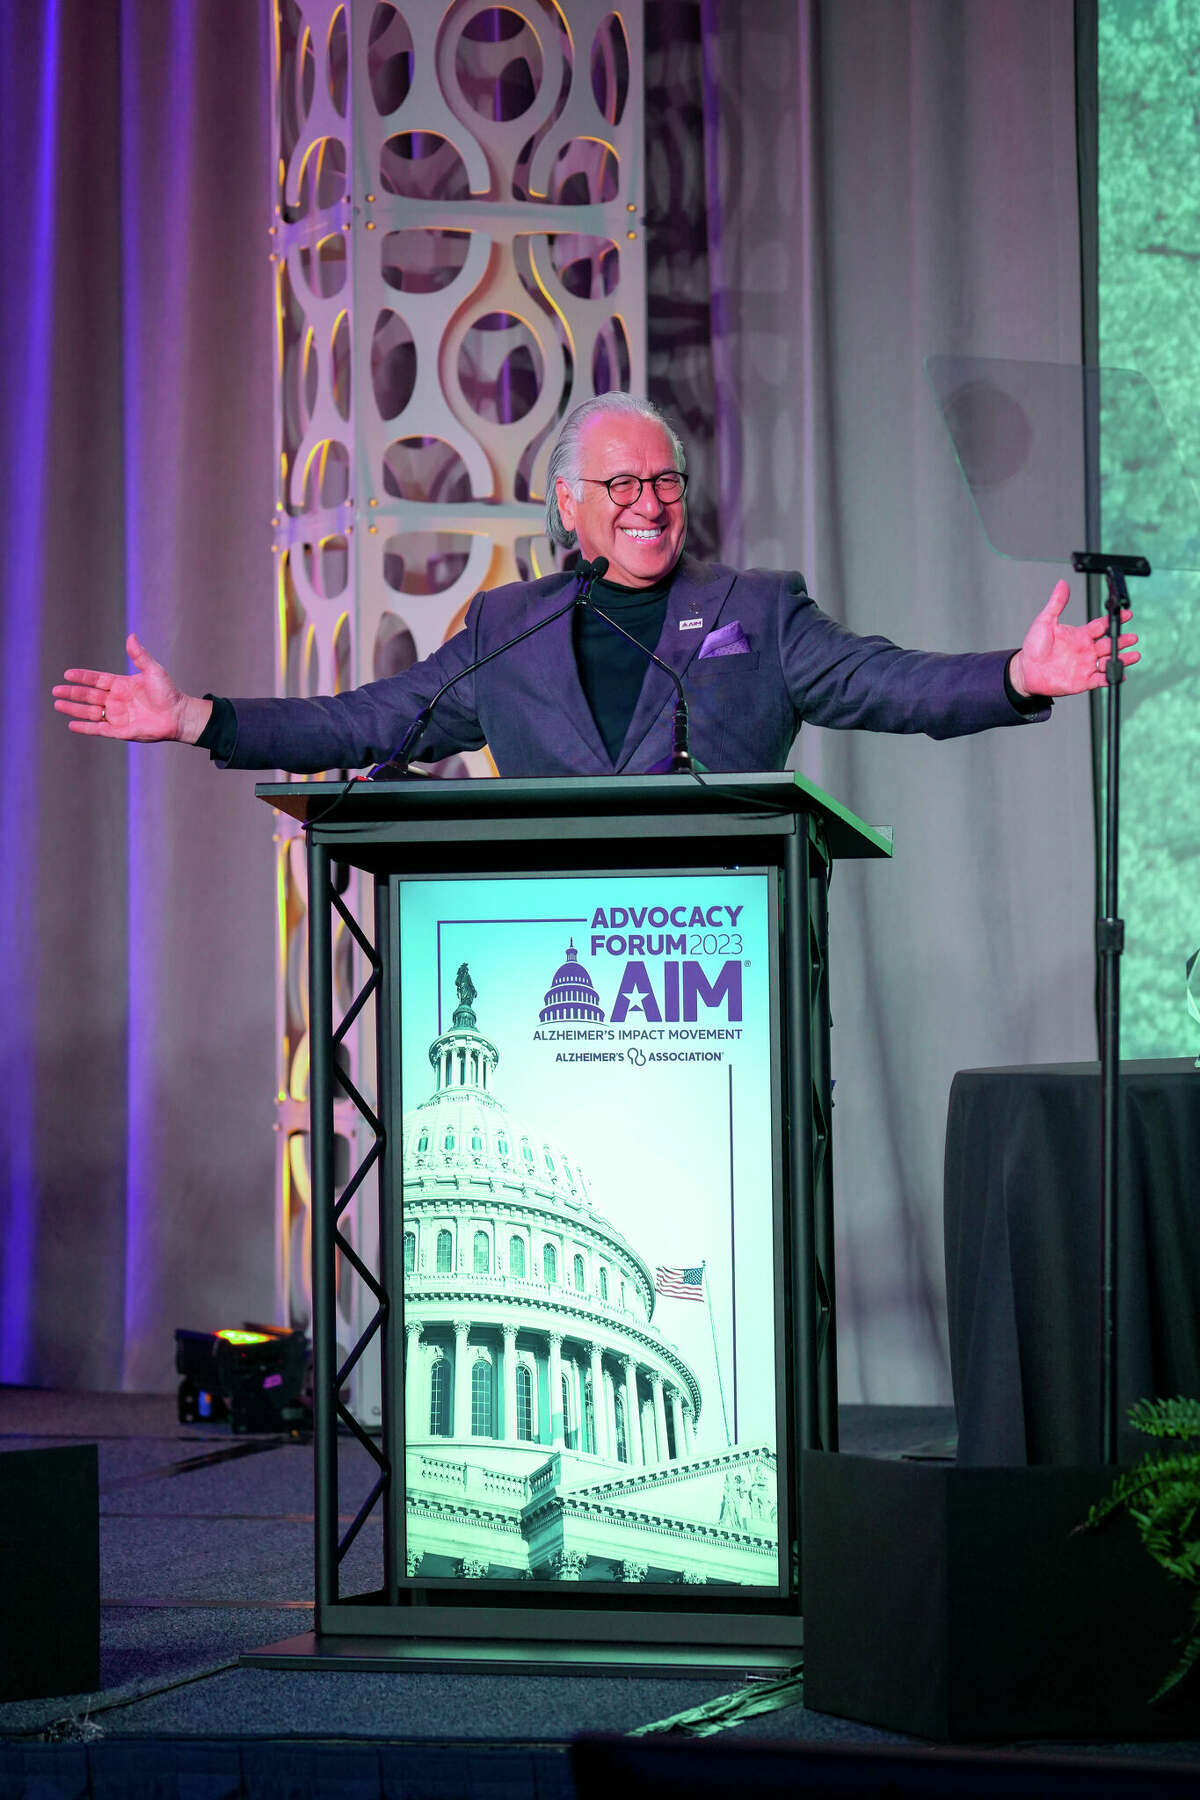 Joe Arciniega delivered the keynote speech that opened the annual Alzheimer's Impact Movement Advocacy Forum in Washington D.C. on March 19, 2023.